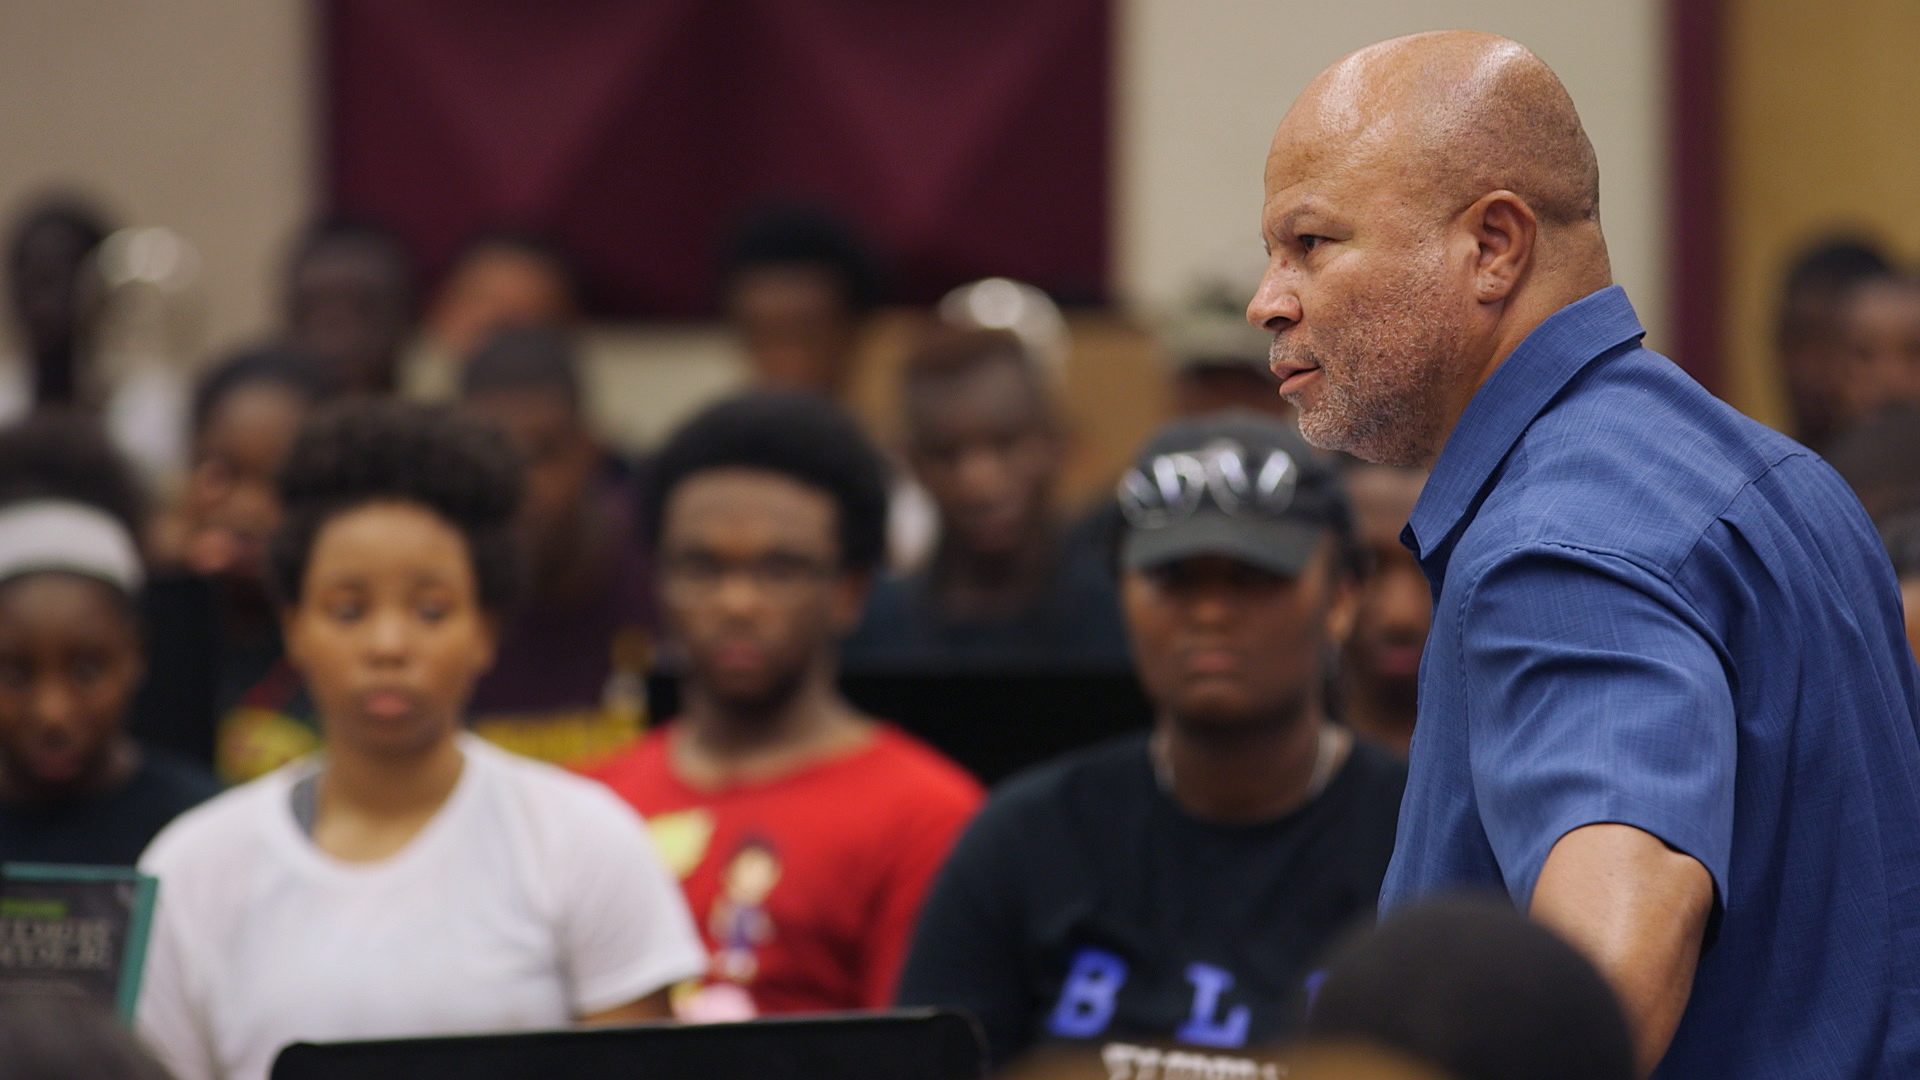 Band Leader, Director, Donovan Wells, Pracice, Rehearsal, Bethune-Cookman University, BCU, Marching Wildcats, Marching Orders, Stage 13 Original, stage13network